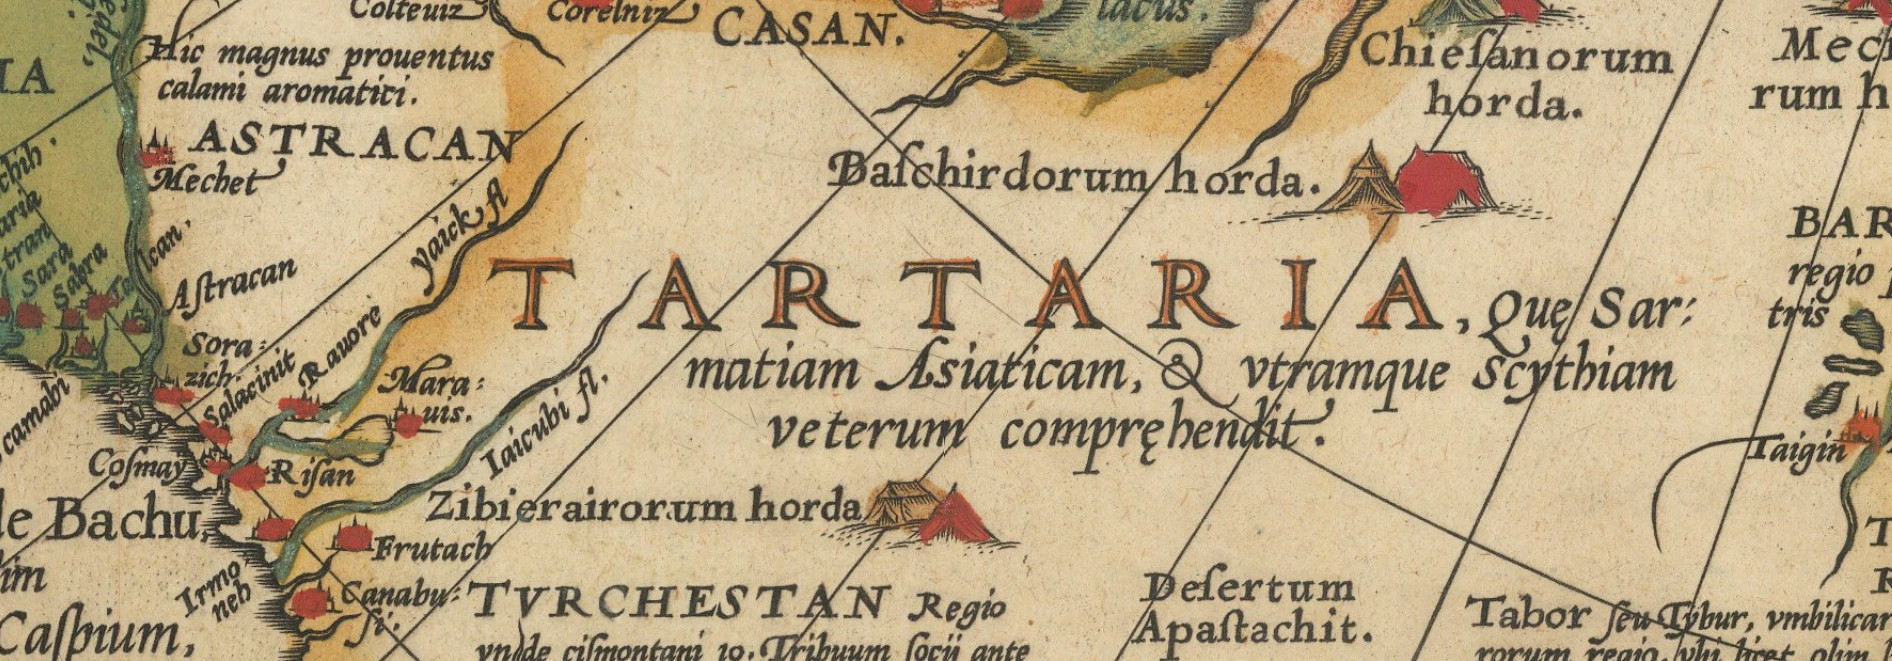 From Tartariae Sive Magni Chami Regni typus by Abraham Ortelius, 1595